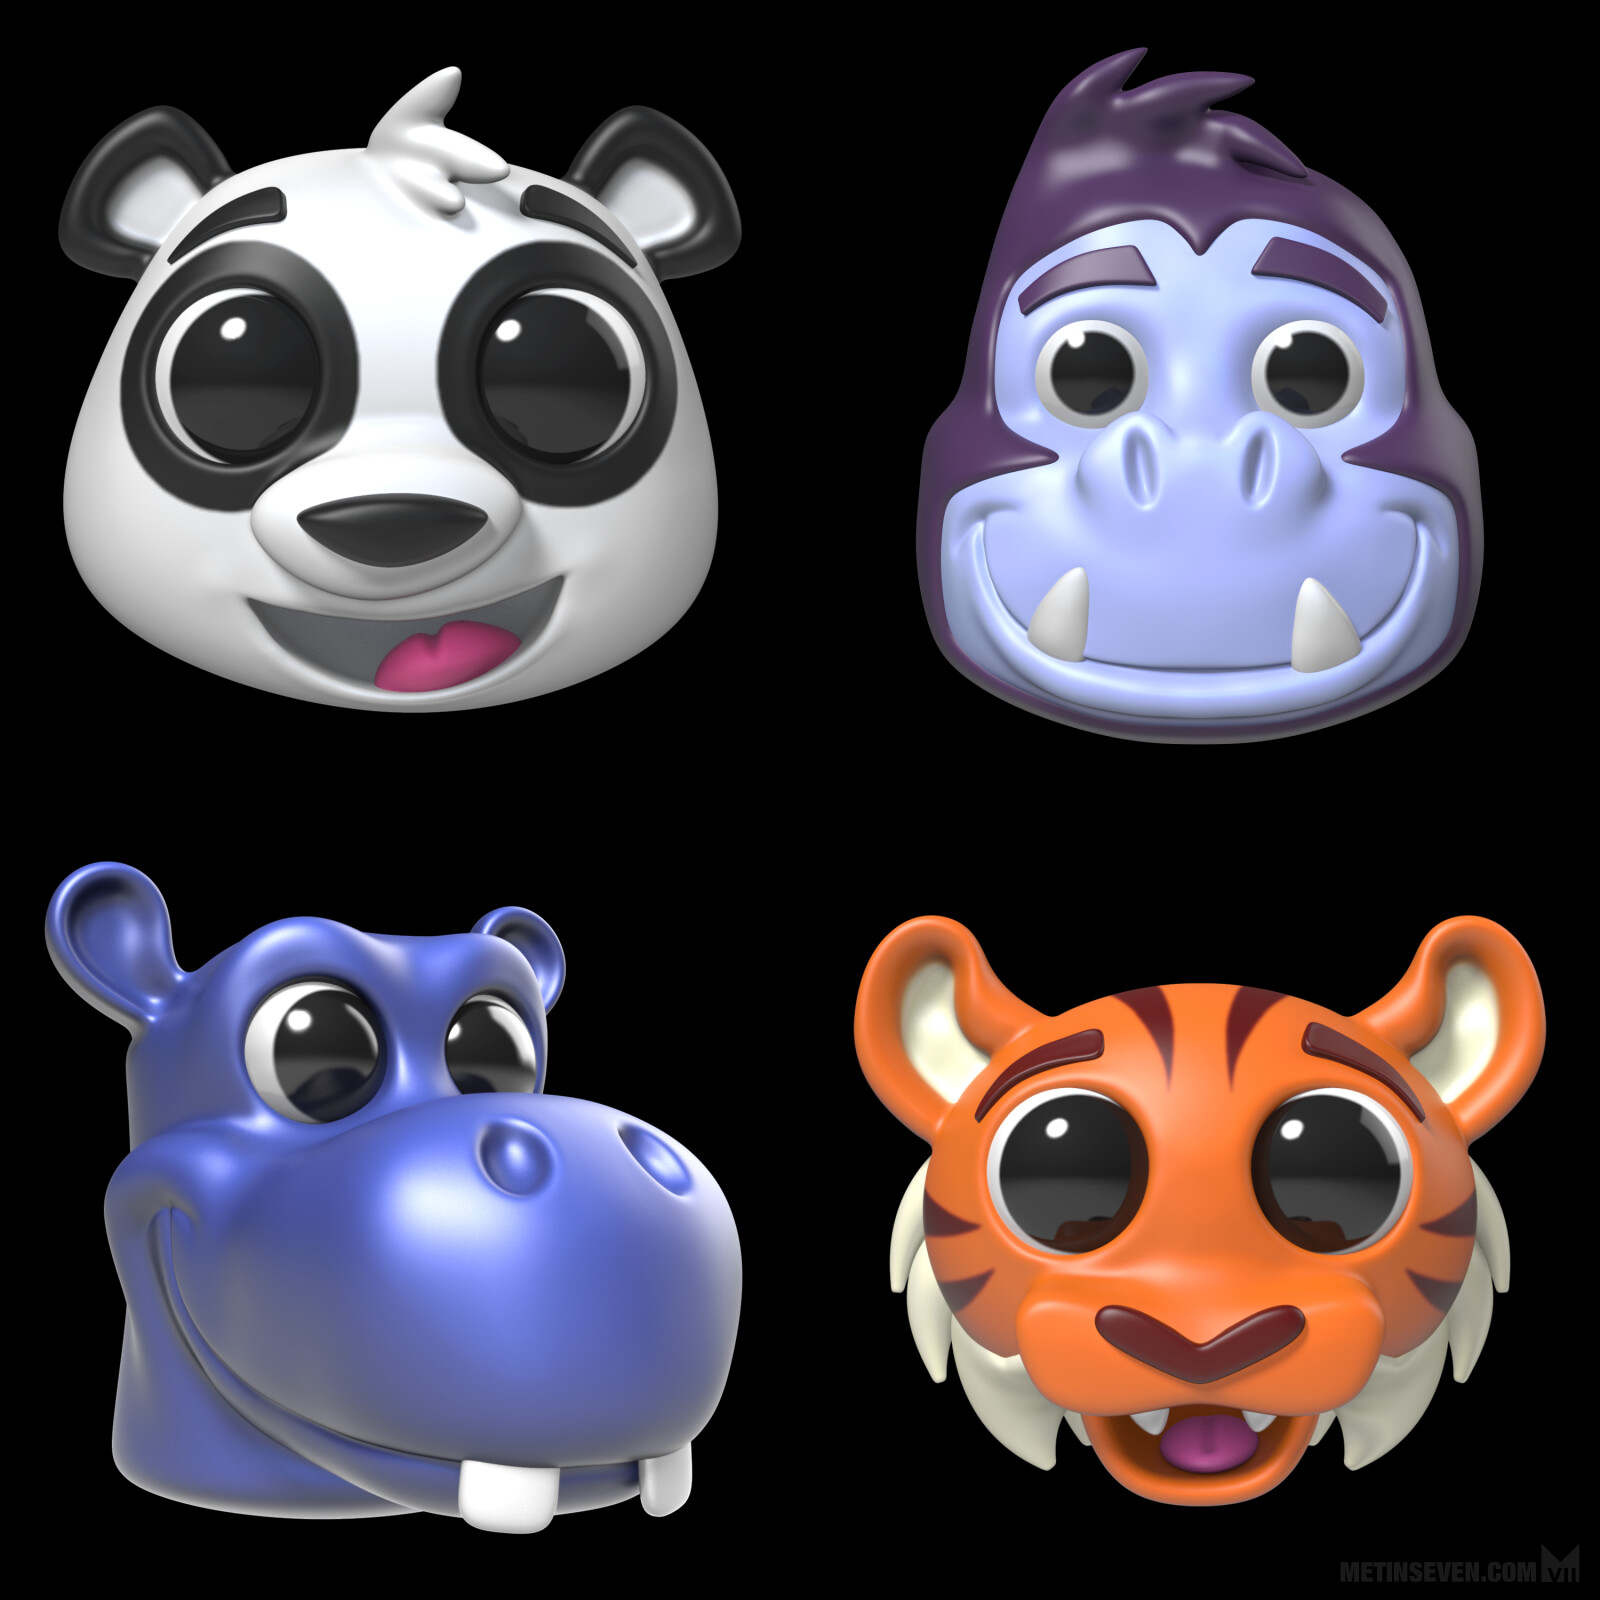 3D toy animal heads for a promotional kids collectibles campaign